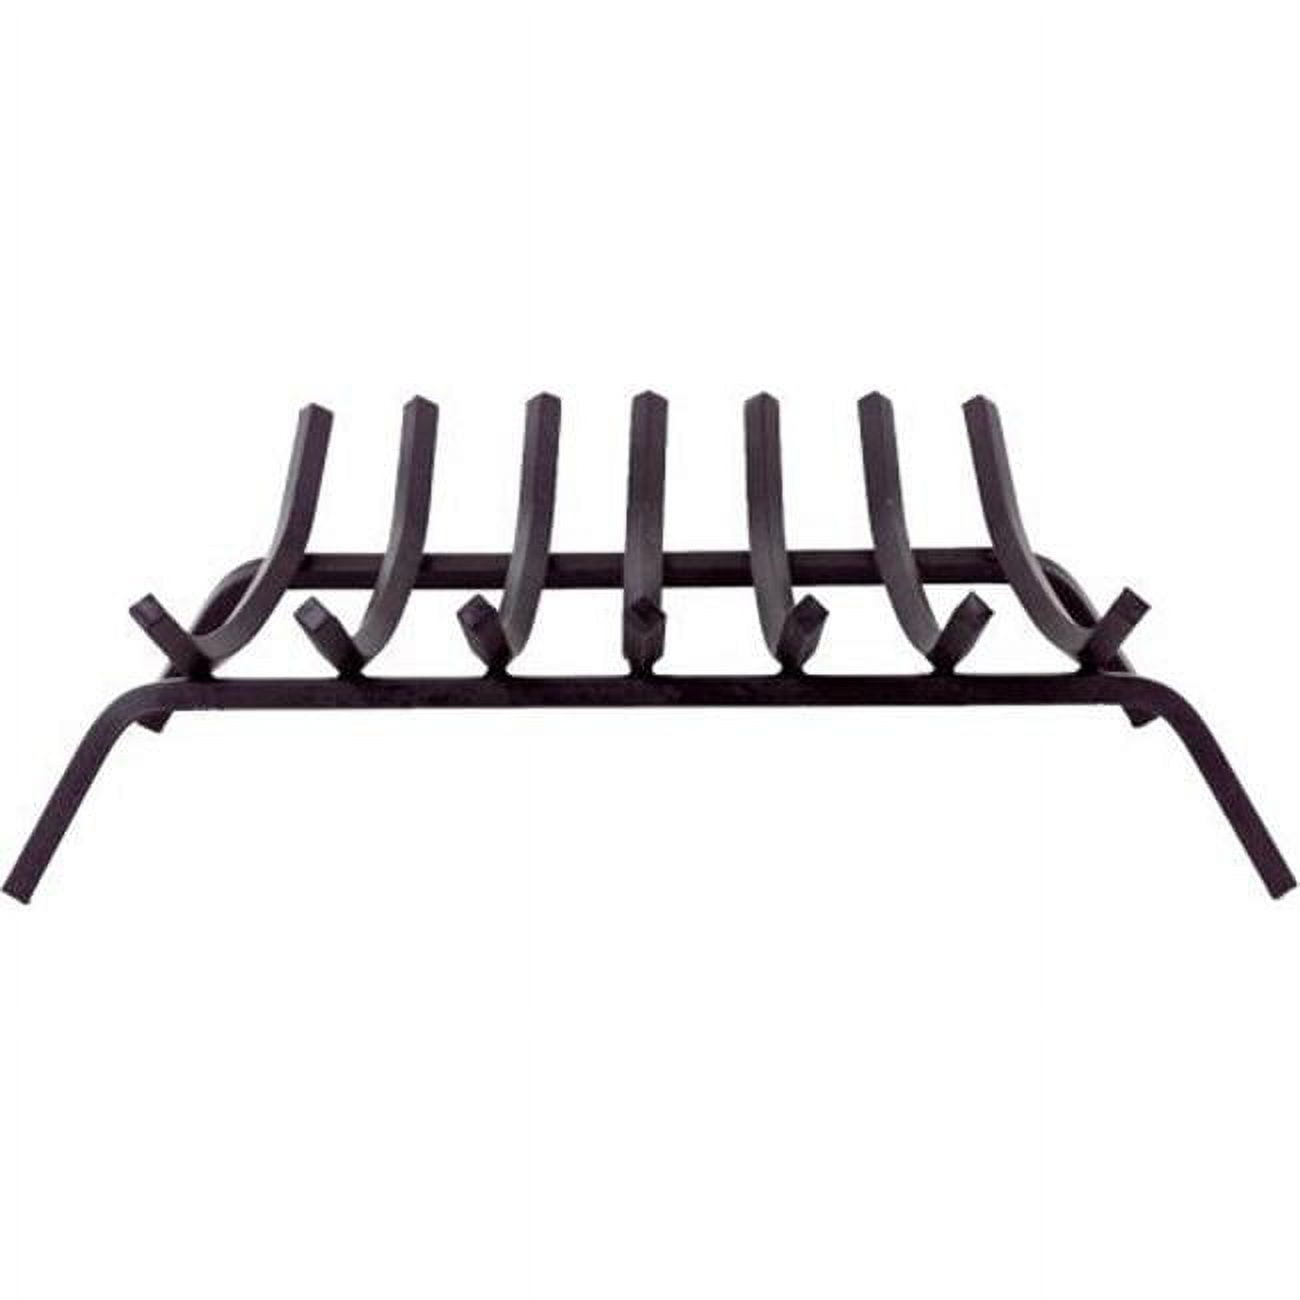 Picture of Dagan 8933-8 0.75 in. Square Steel 8 Bar Grate, Black